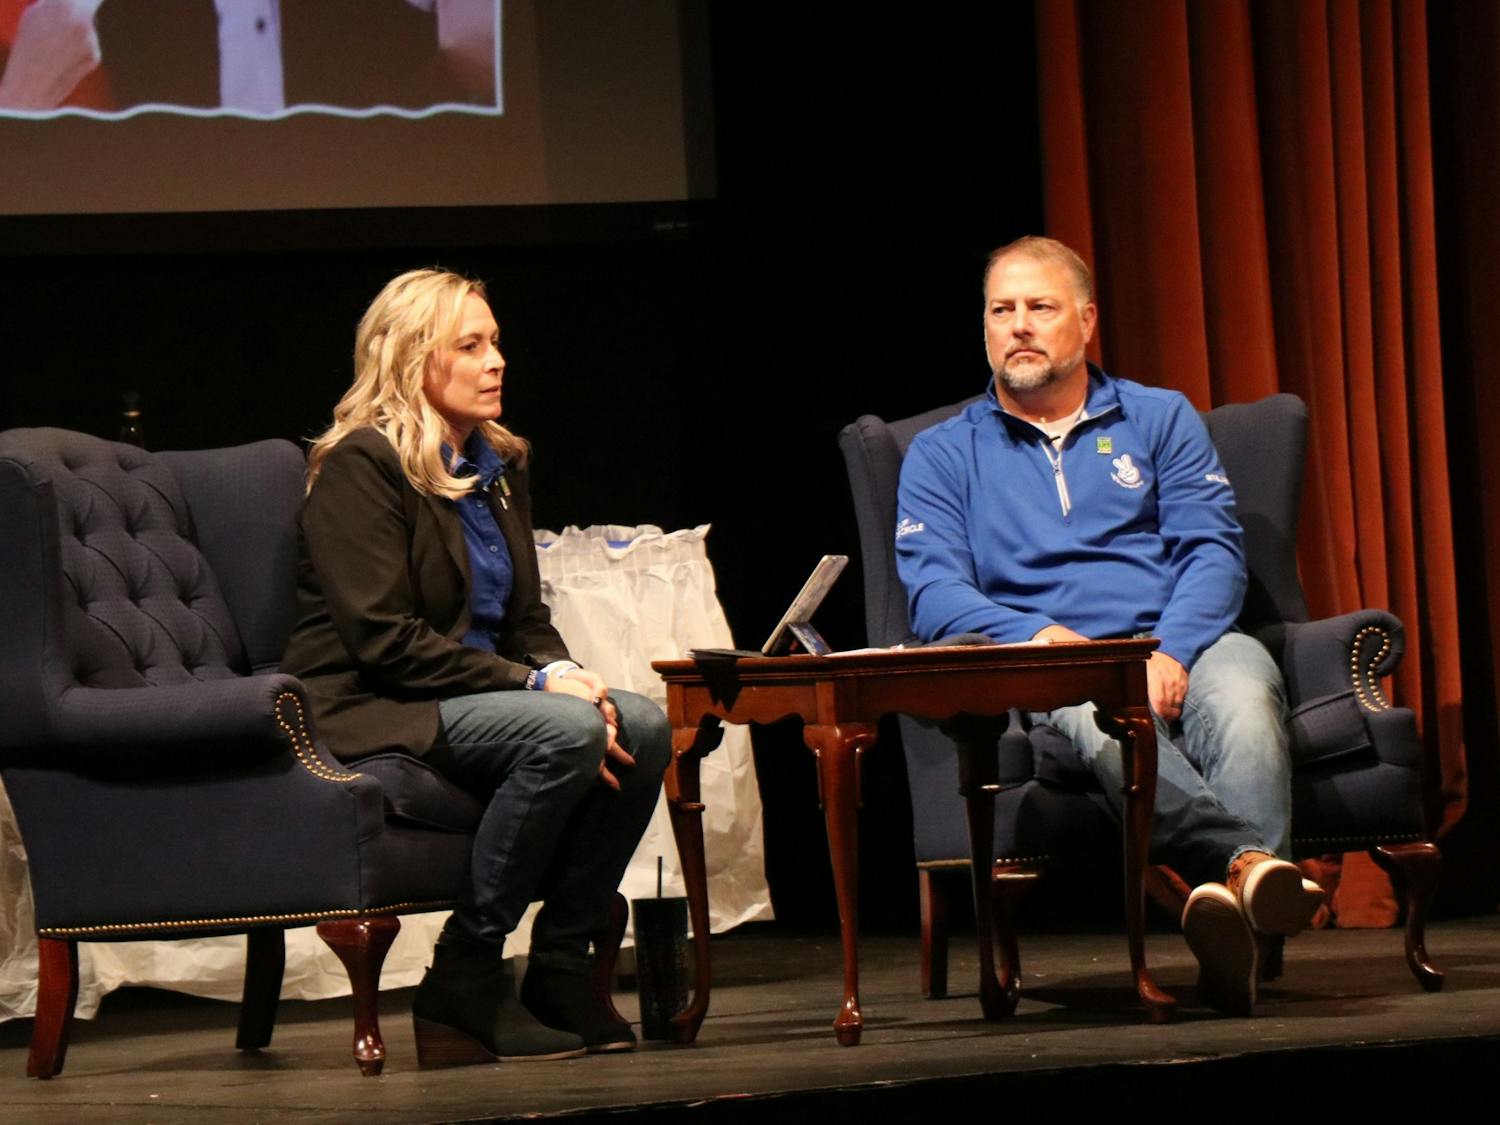 Cory and Shari Foltz talk about their son Stone during their presentation in Cowan Hall. Stone died as a result of hazing in March of 2021.